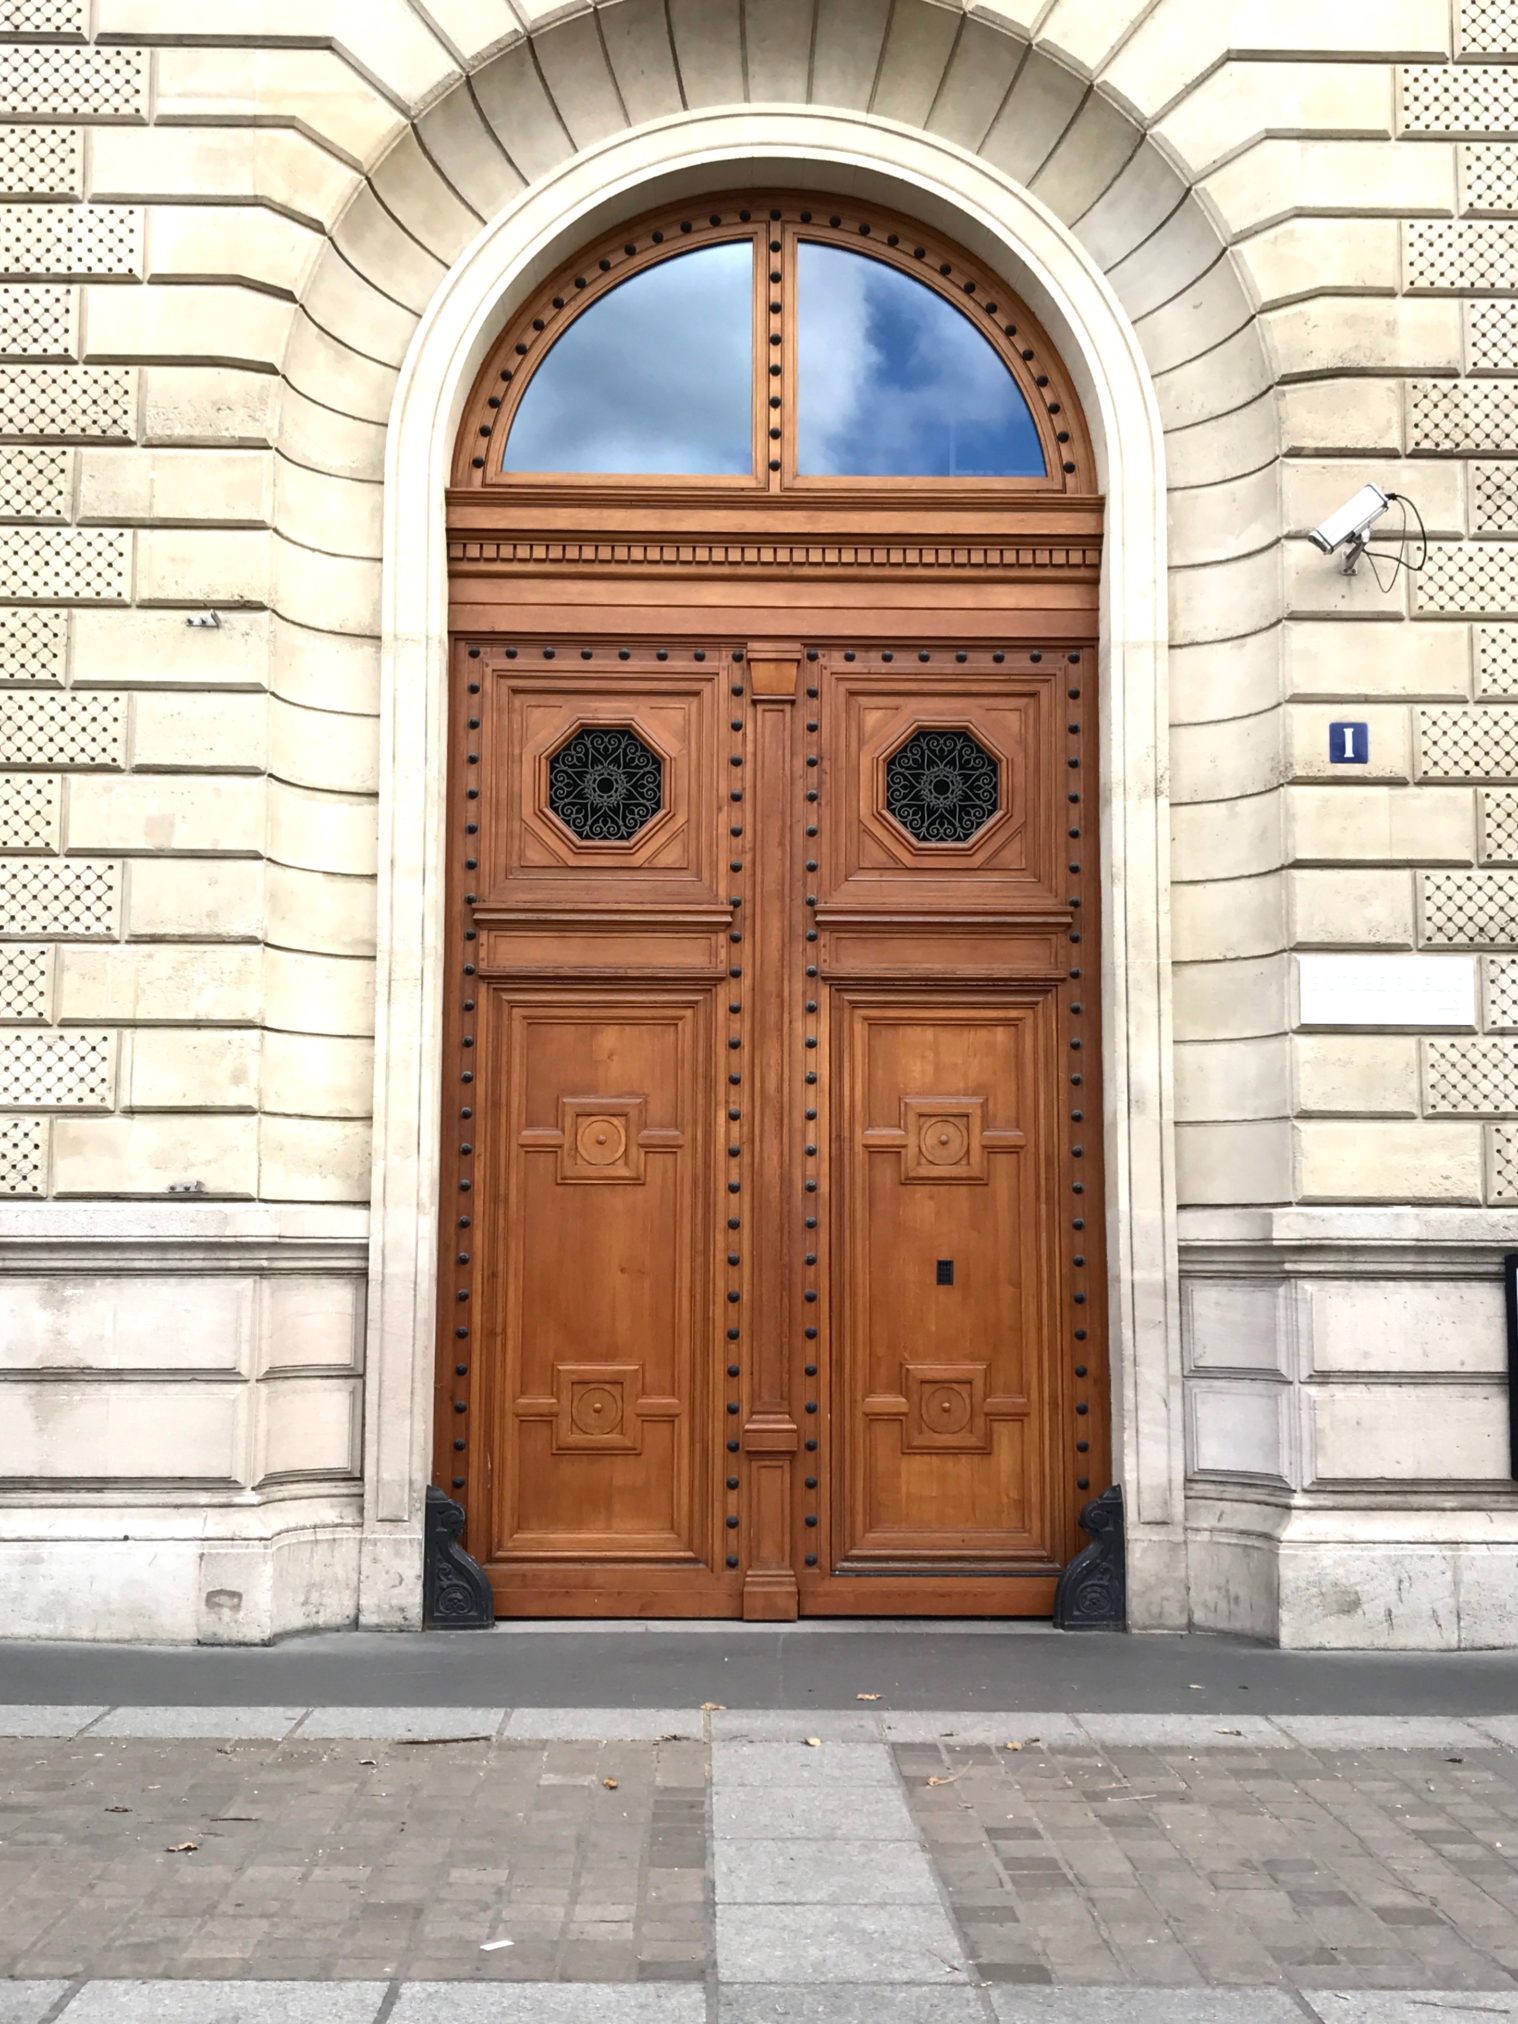 After traveling to Paris I fell in love with the colorful and gorgeous doors, to see more inspirational front doors from the streets of paris head over to www.homewithkeki.com #interiors #travel #paris